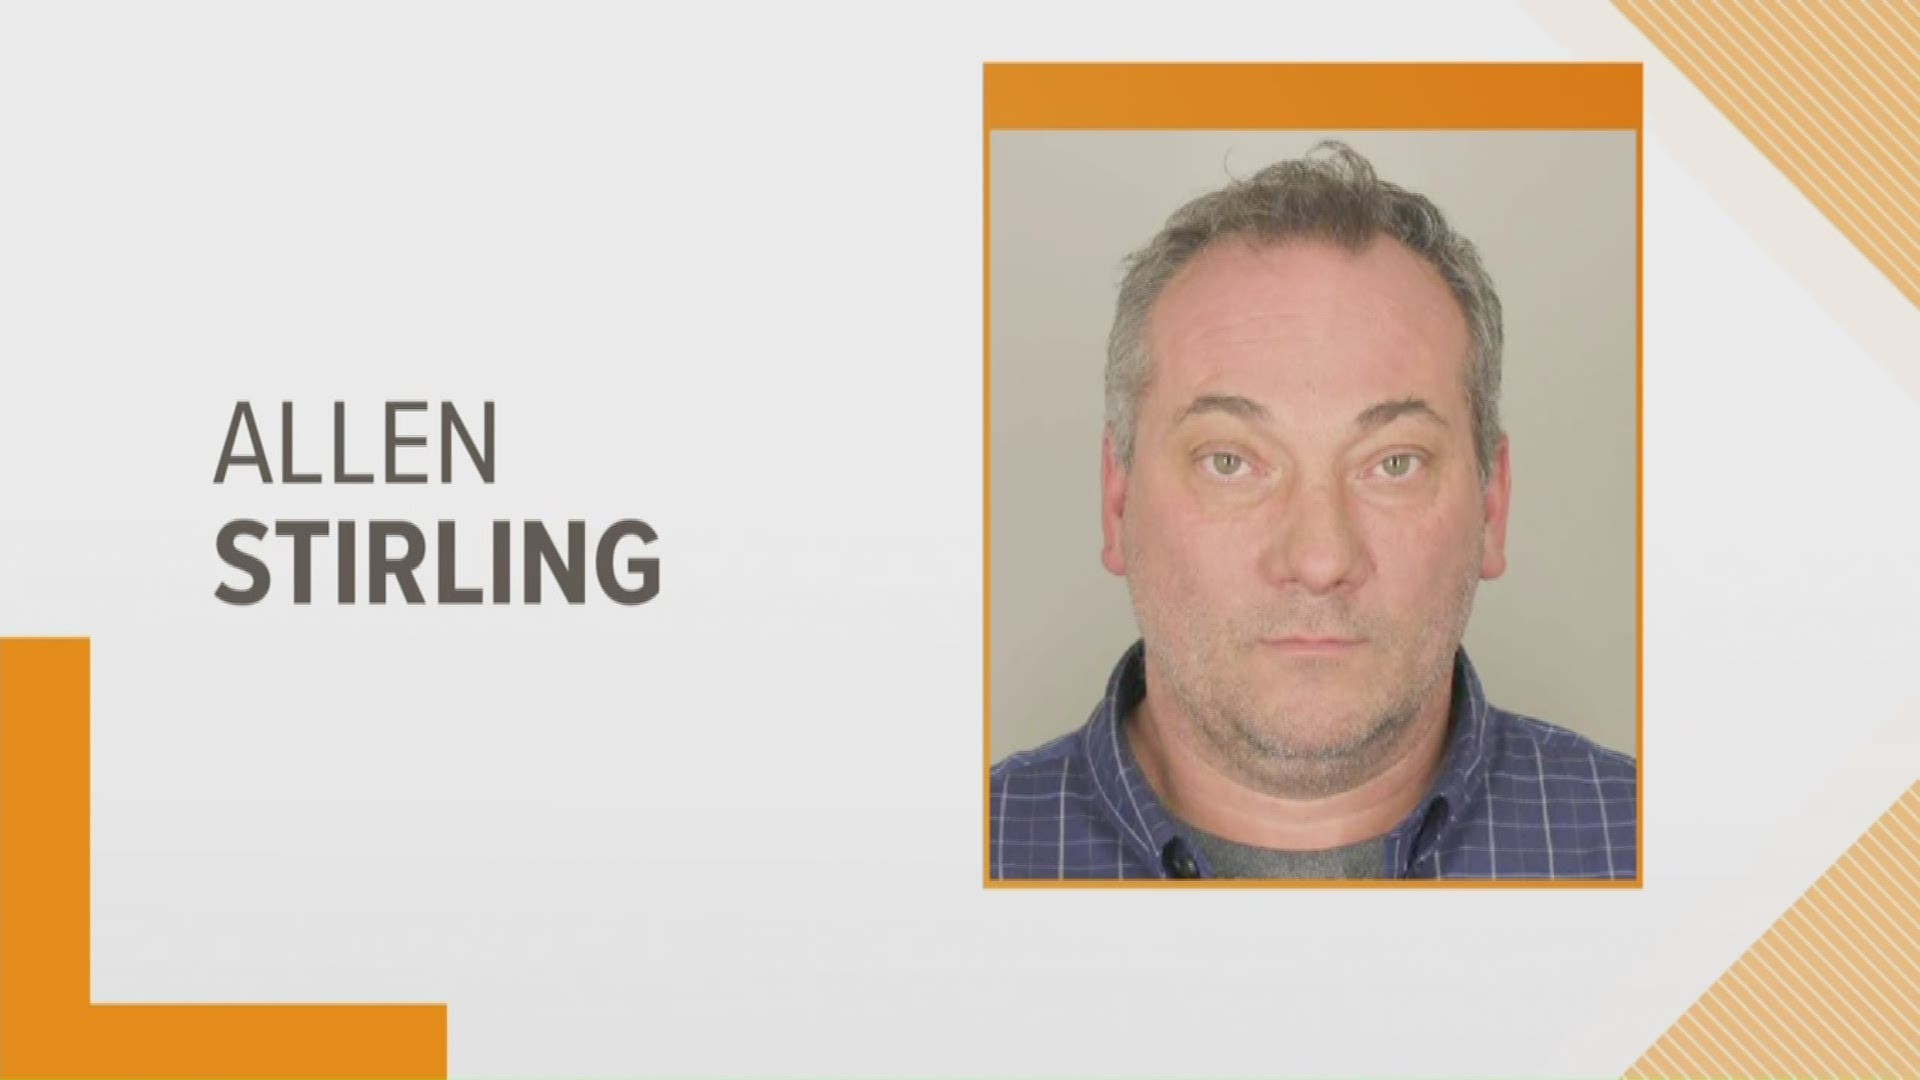 Allen Stirling is charged with criminally negligent homicide in connection with a May crash that killed Jodie Anstett.